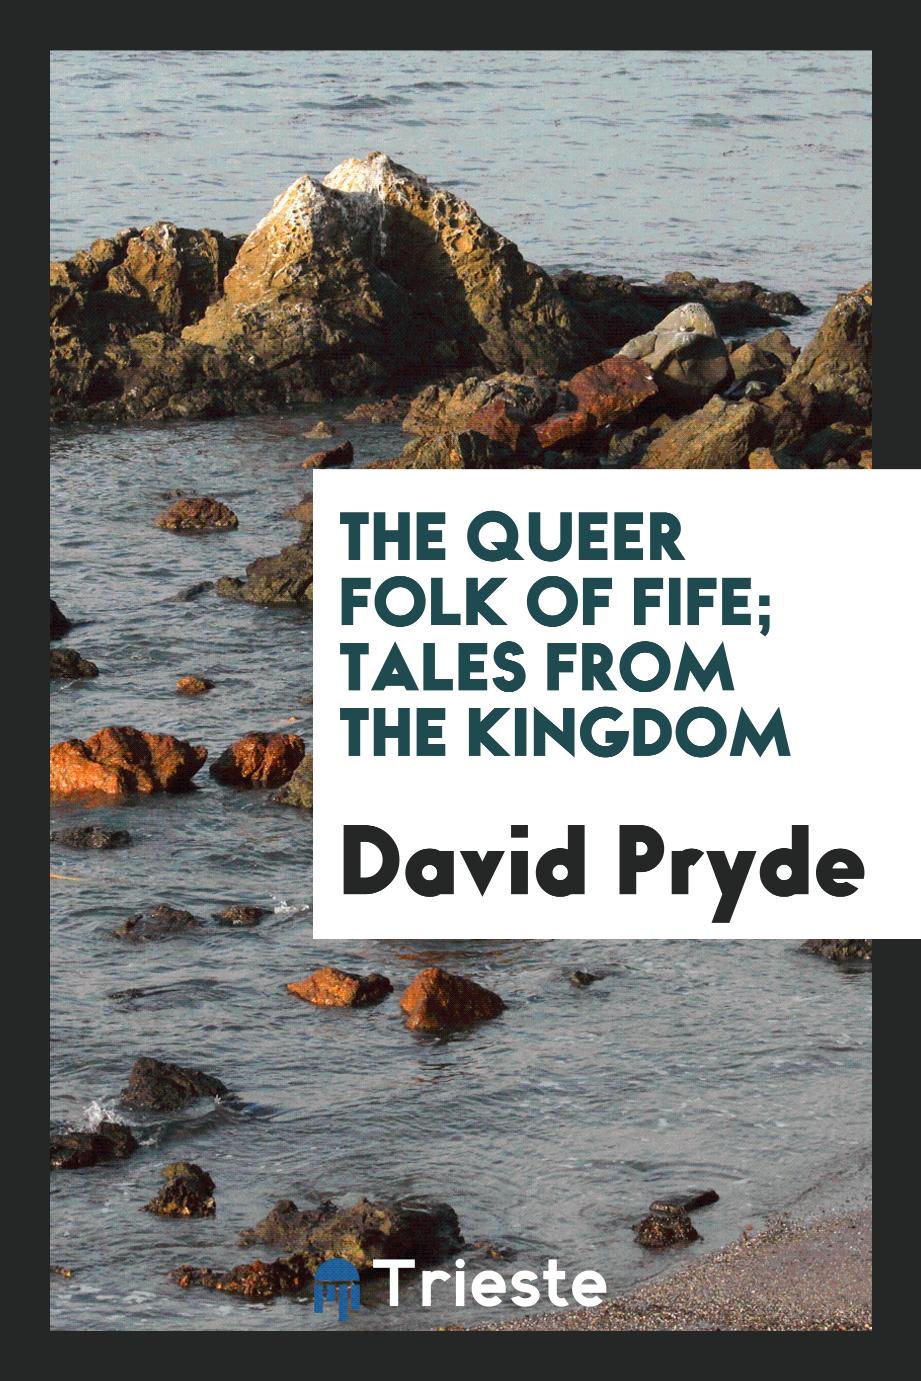 The queer folk of Fife; tales from the Kingdom